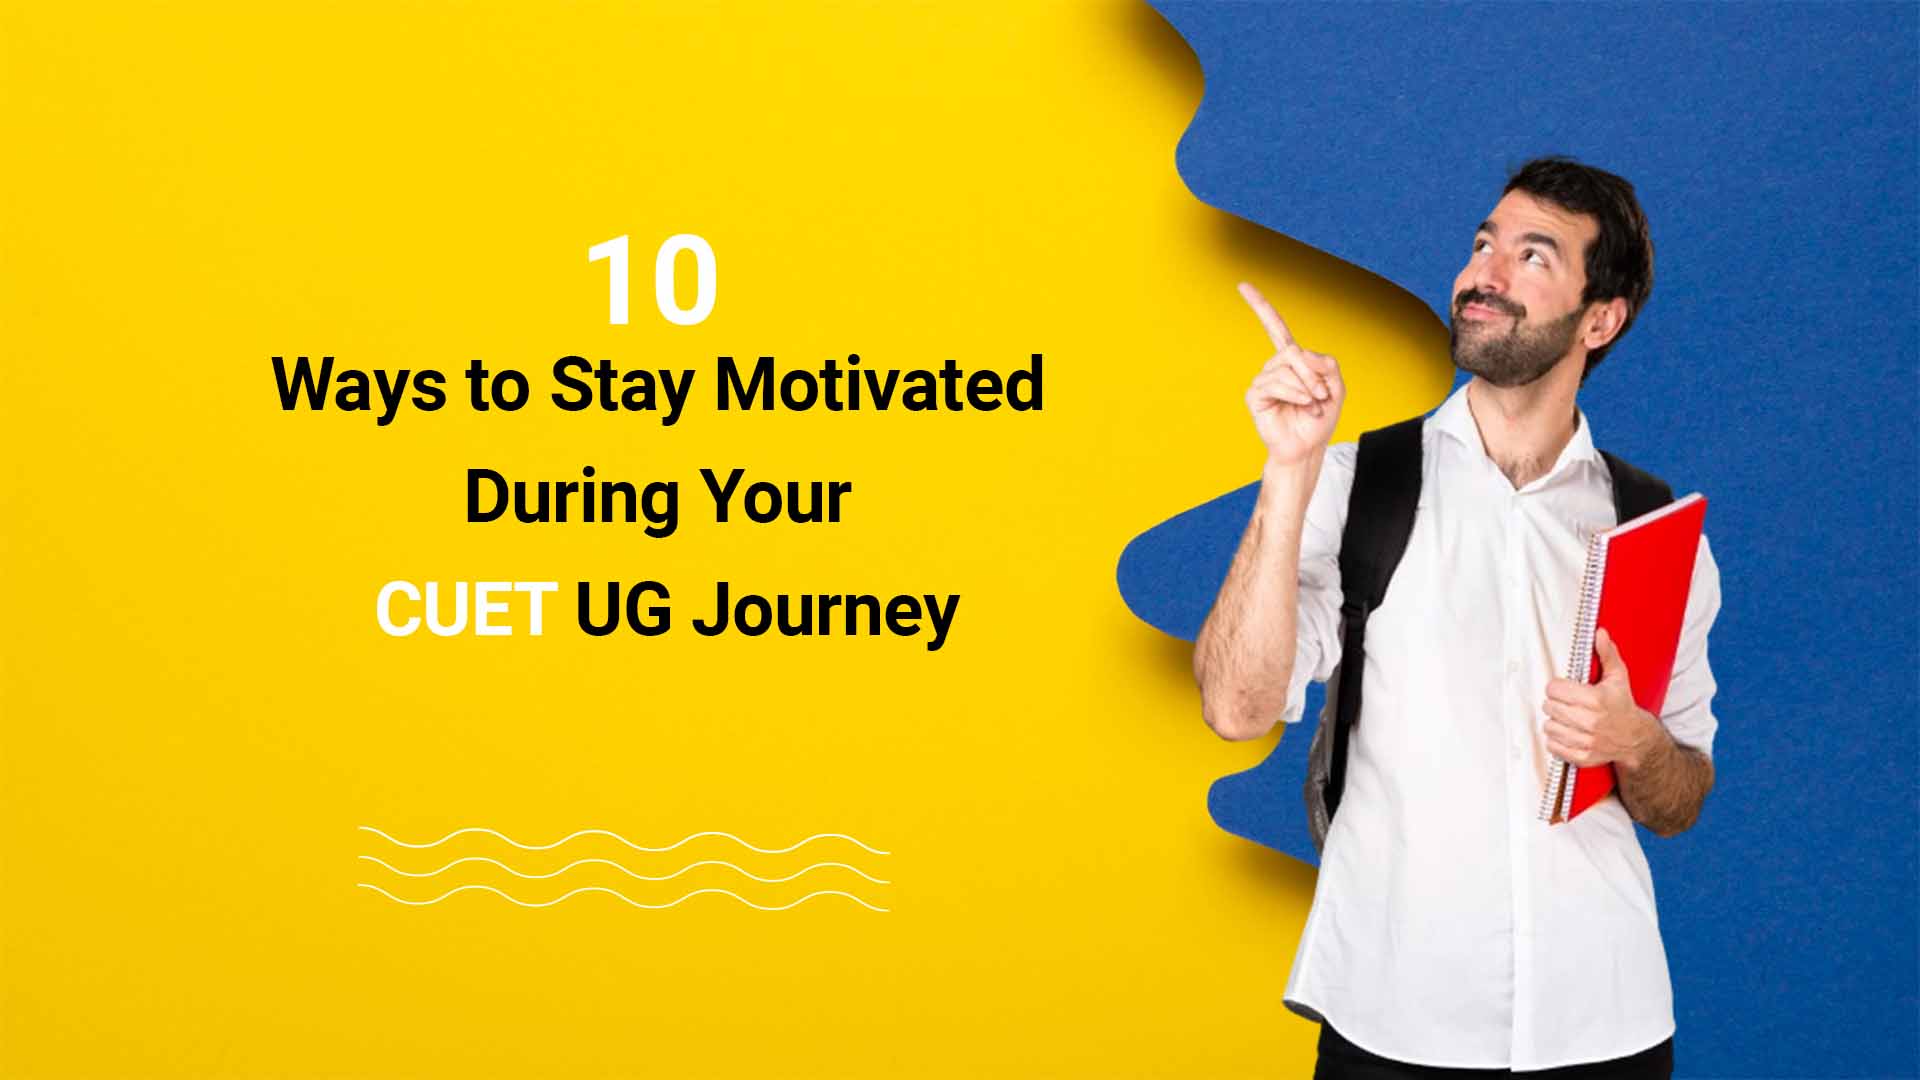 10 Ways to Stay Motivated During Your CUET UG Journey